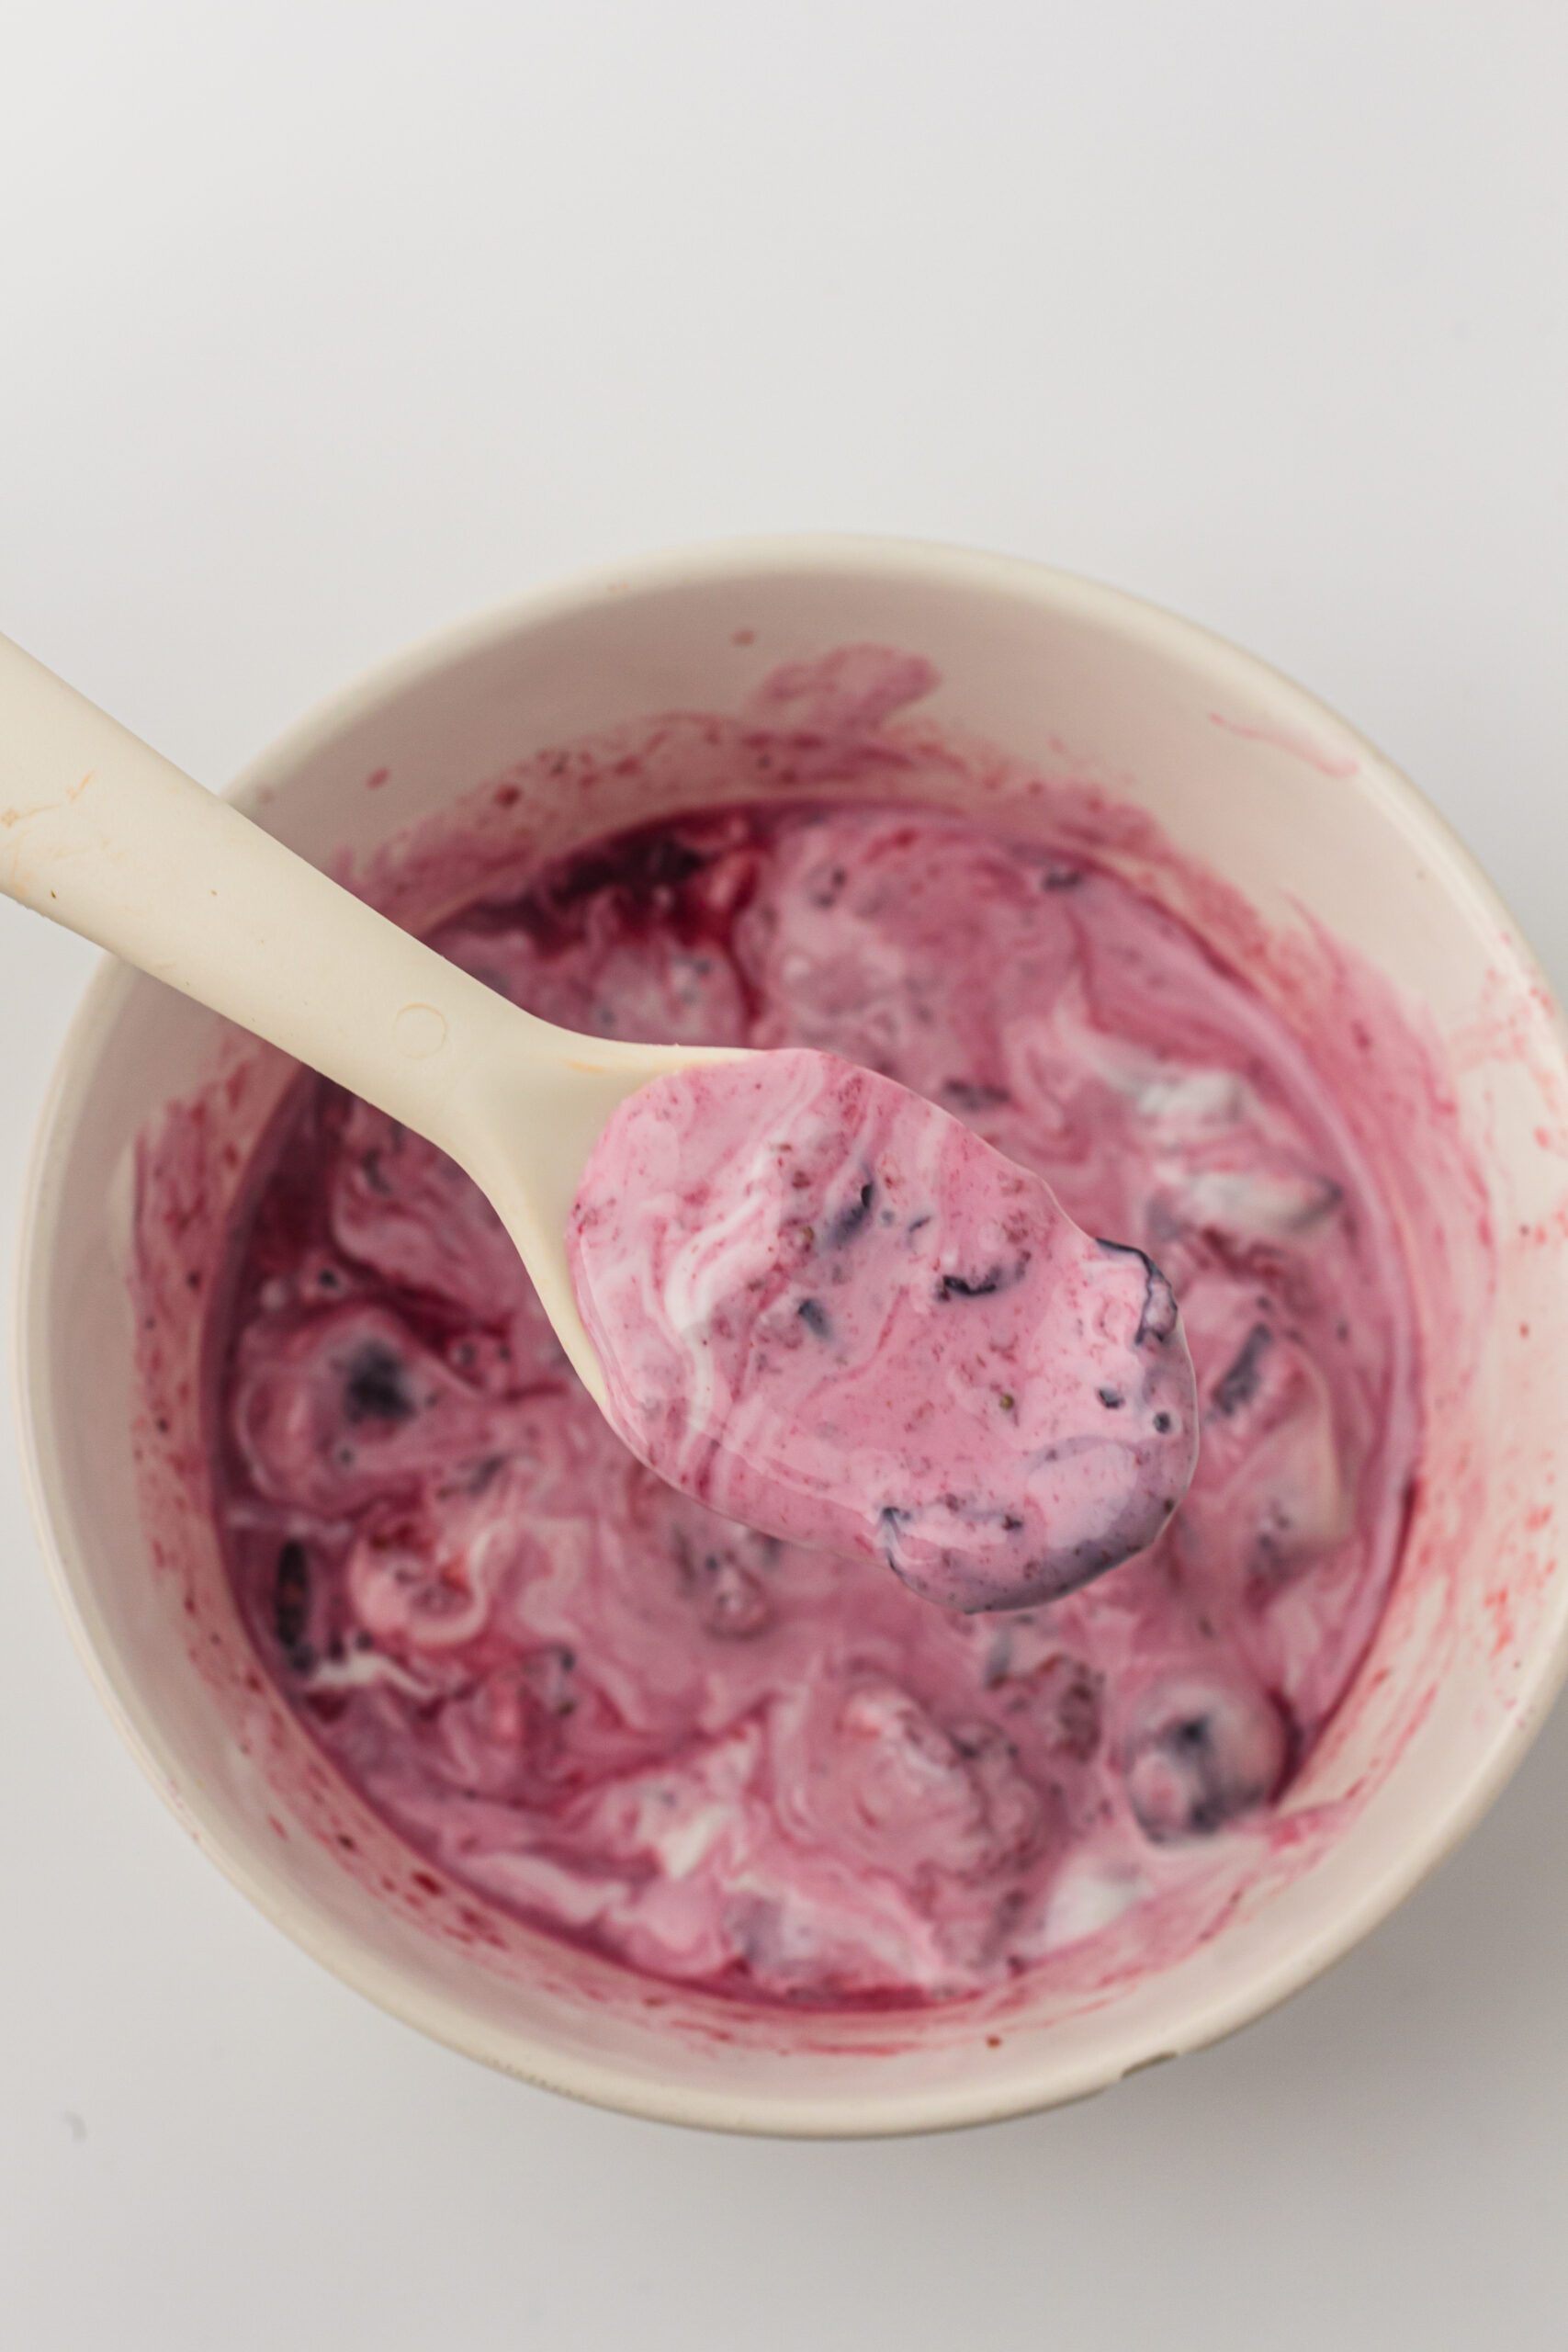 Yogurt and Berries for Babies and Toddlers: A Quick Snack or Breakfast